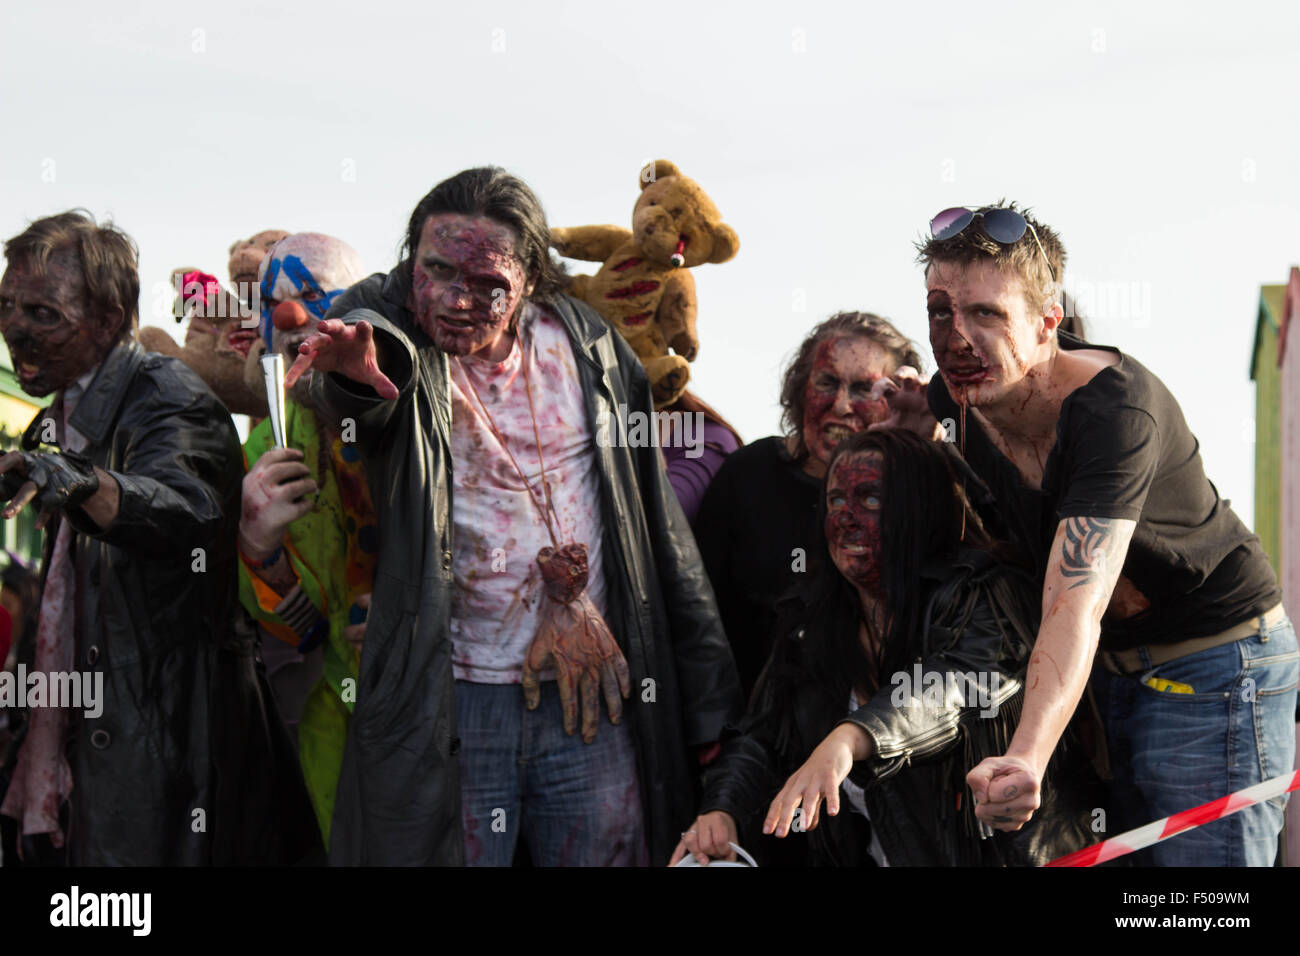 Southend on Sea, Essex, UK. 25th Oct 15. Halloween celebrations get under way in Southend on sea with the annual Southend pier Zombie walk. Credit:  darren Attersley/Alamy Live News Stock Photo